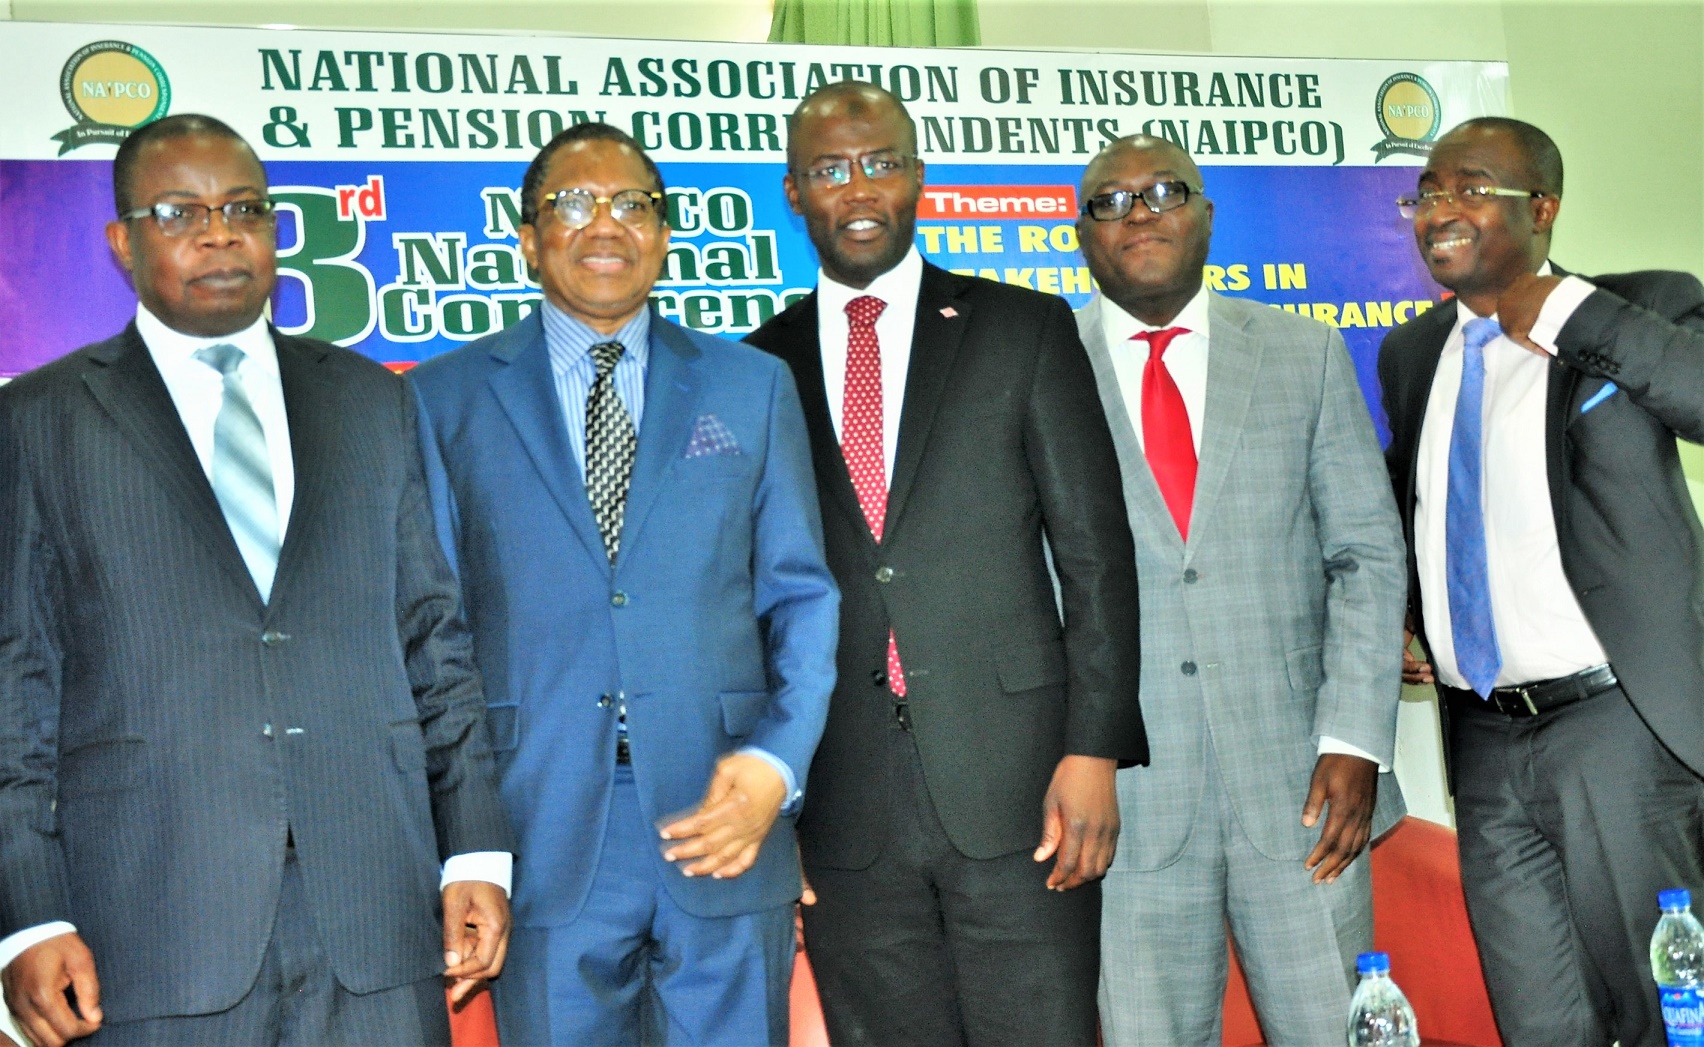 L-R: Mr. Lana Loyinmi, Head Contribution & Bond Redemption, National Pension Commission; Alhaji Bala Zakariya’u, past president, Chartered Insurance Institute of Nigeria and Chairman of occasion; Mr Moruf Apampa, Managing Director/CEO, SUNU Assurance Plc; Mr Adebayo Adeleke, Managing Director, Lancelot Ventures Ltd, and Mr. Supo Sogolola, Executive Director, Law Union & Rock Insurance, during the  3rd Annual National Conference of the National Association of Insurance and Pension Correspondents (NAIPCO) on The Role of Stakeholders in Developing Insurance and Pension Sectors held in Lagos on Thursday. August 09, 2018.   